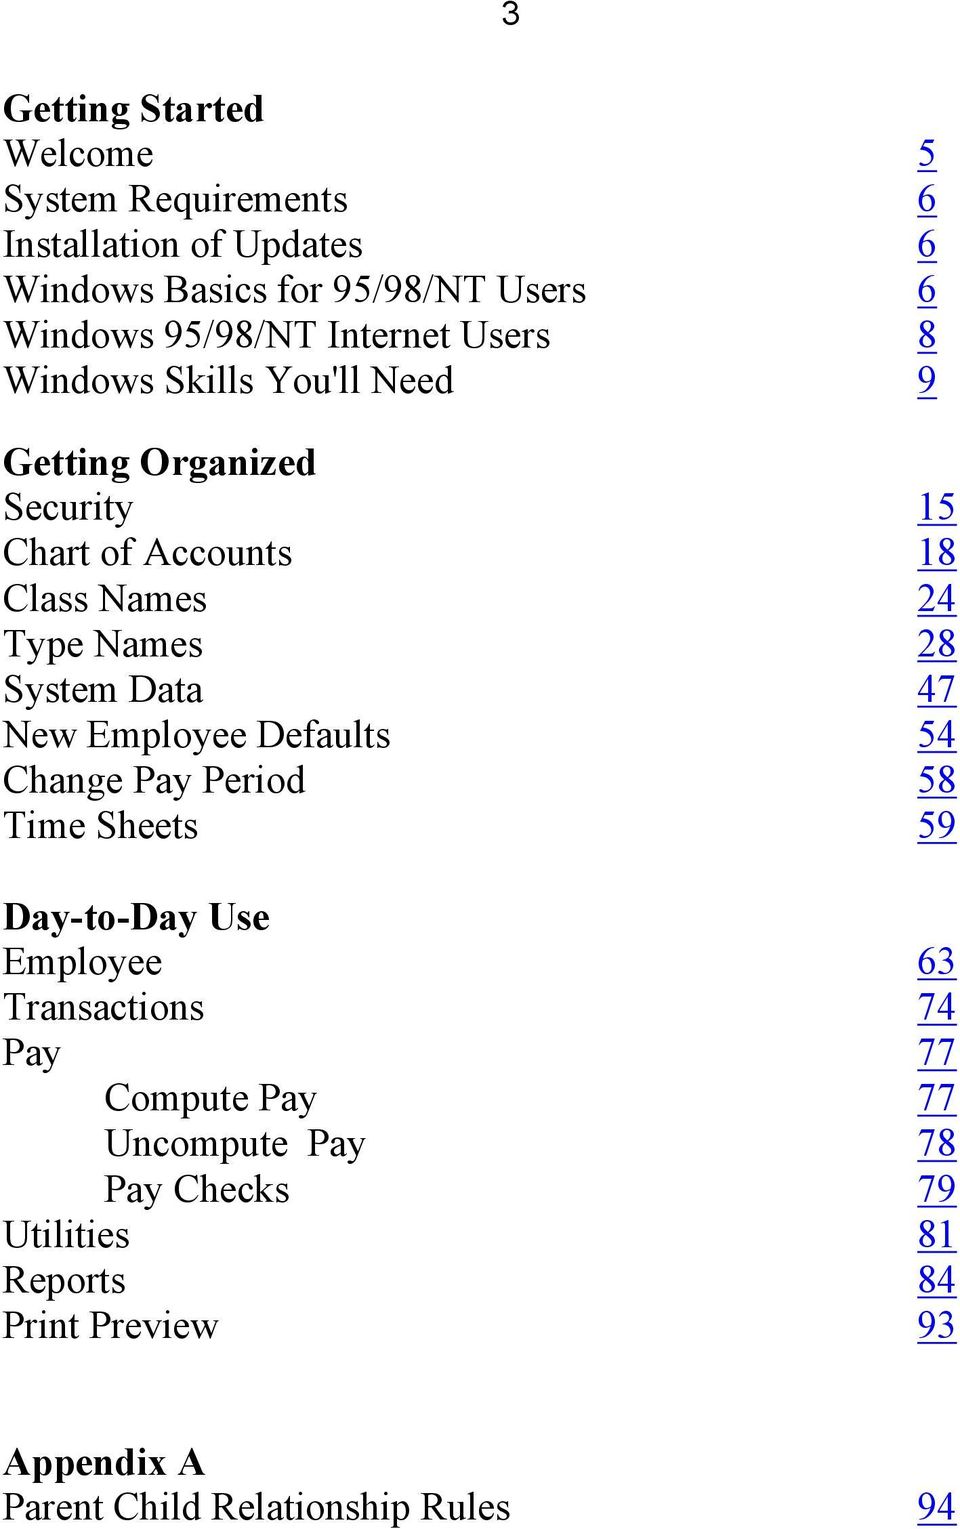 System Data 47 New Employee Defaults 54 Change Pay Period 58 Time Sheets 59 Day-to-Day Use Employee 63 Transactions 74 Pay 77